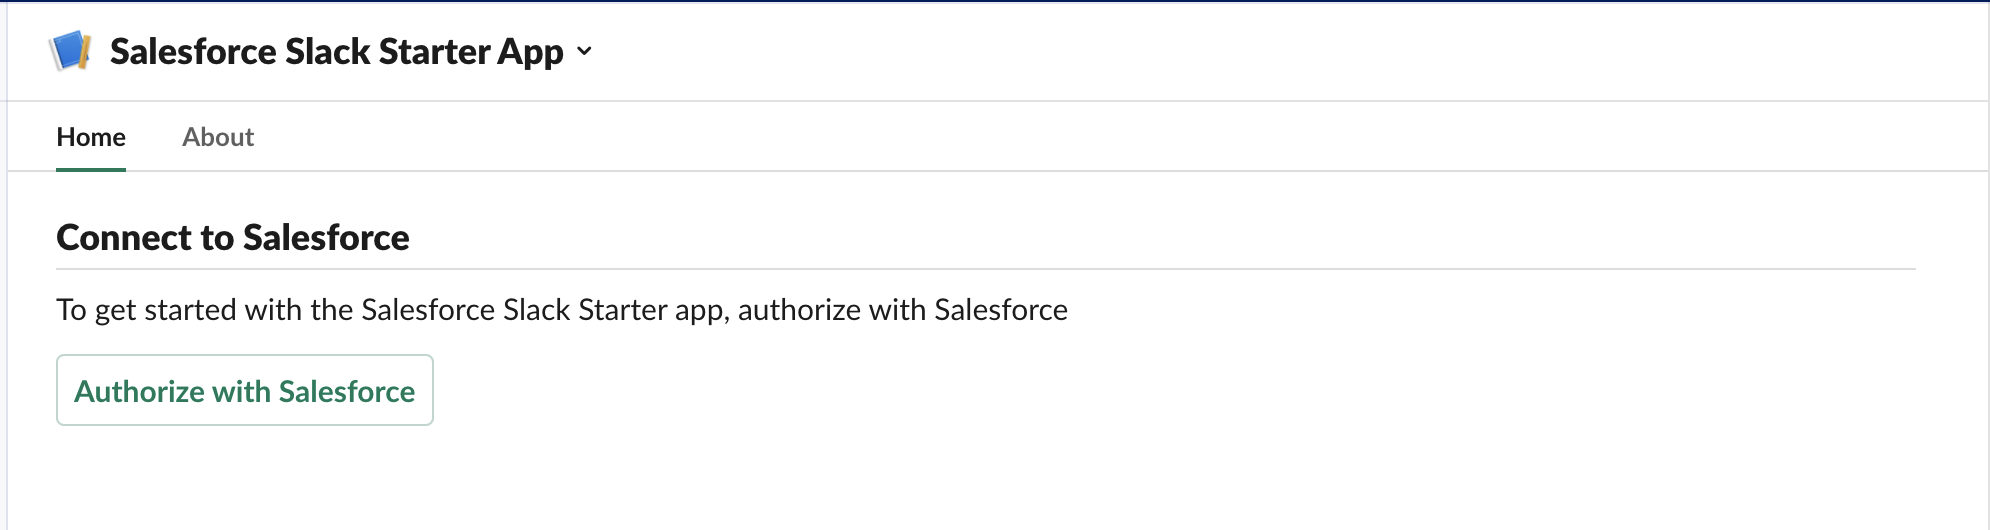 Authorize with Salesforce